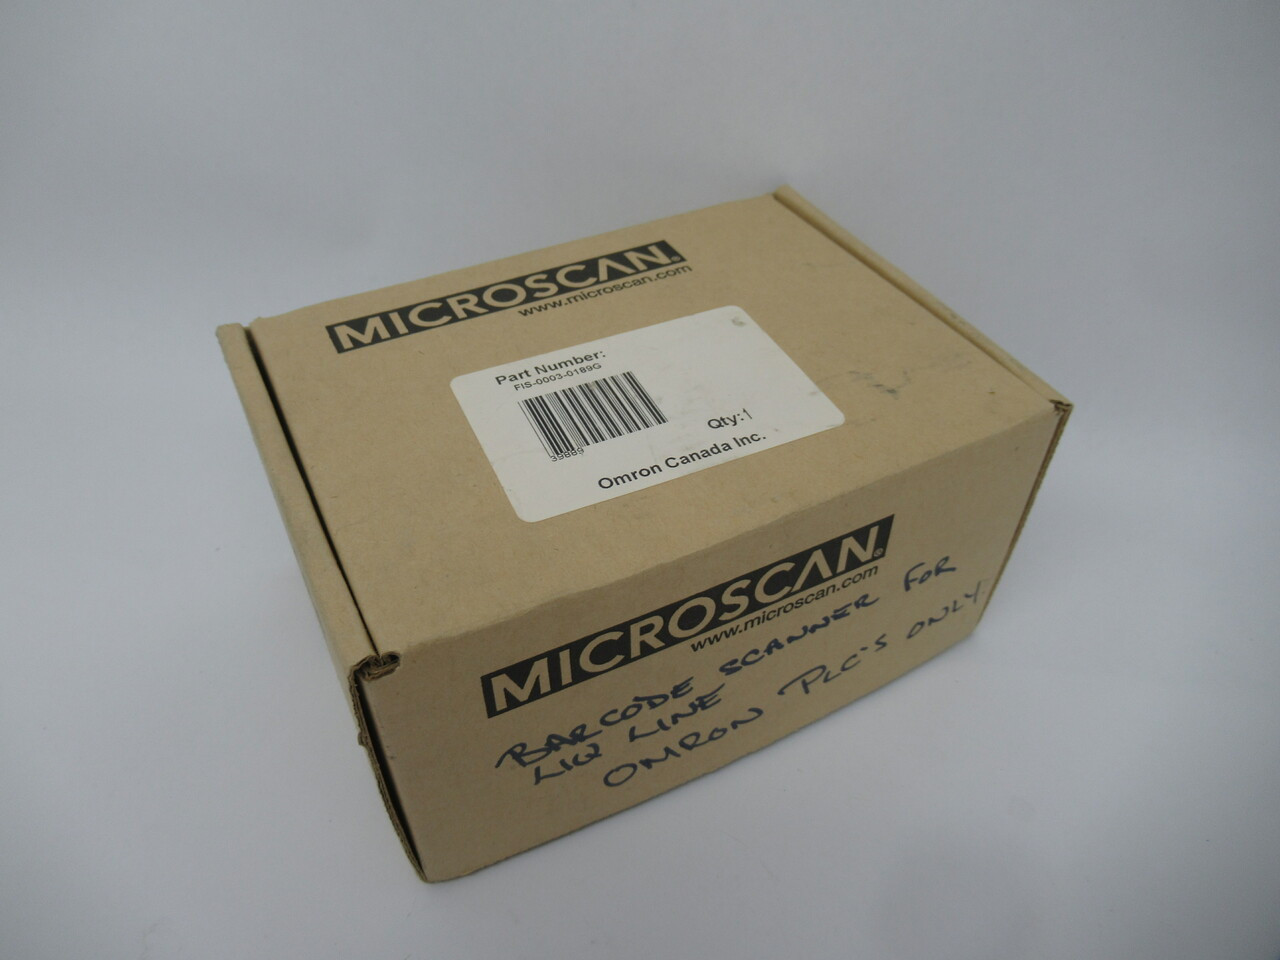 Microscan FIS-0003-0189G Fixed Barcode Scanner 5VDC 2W NEW